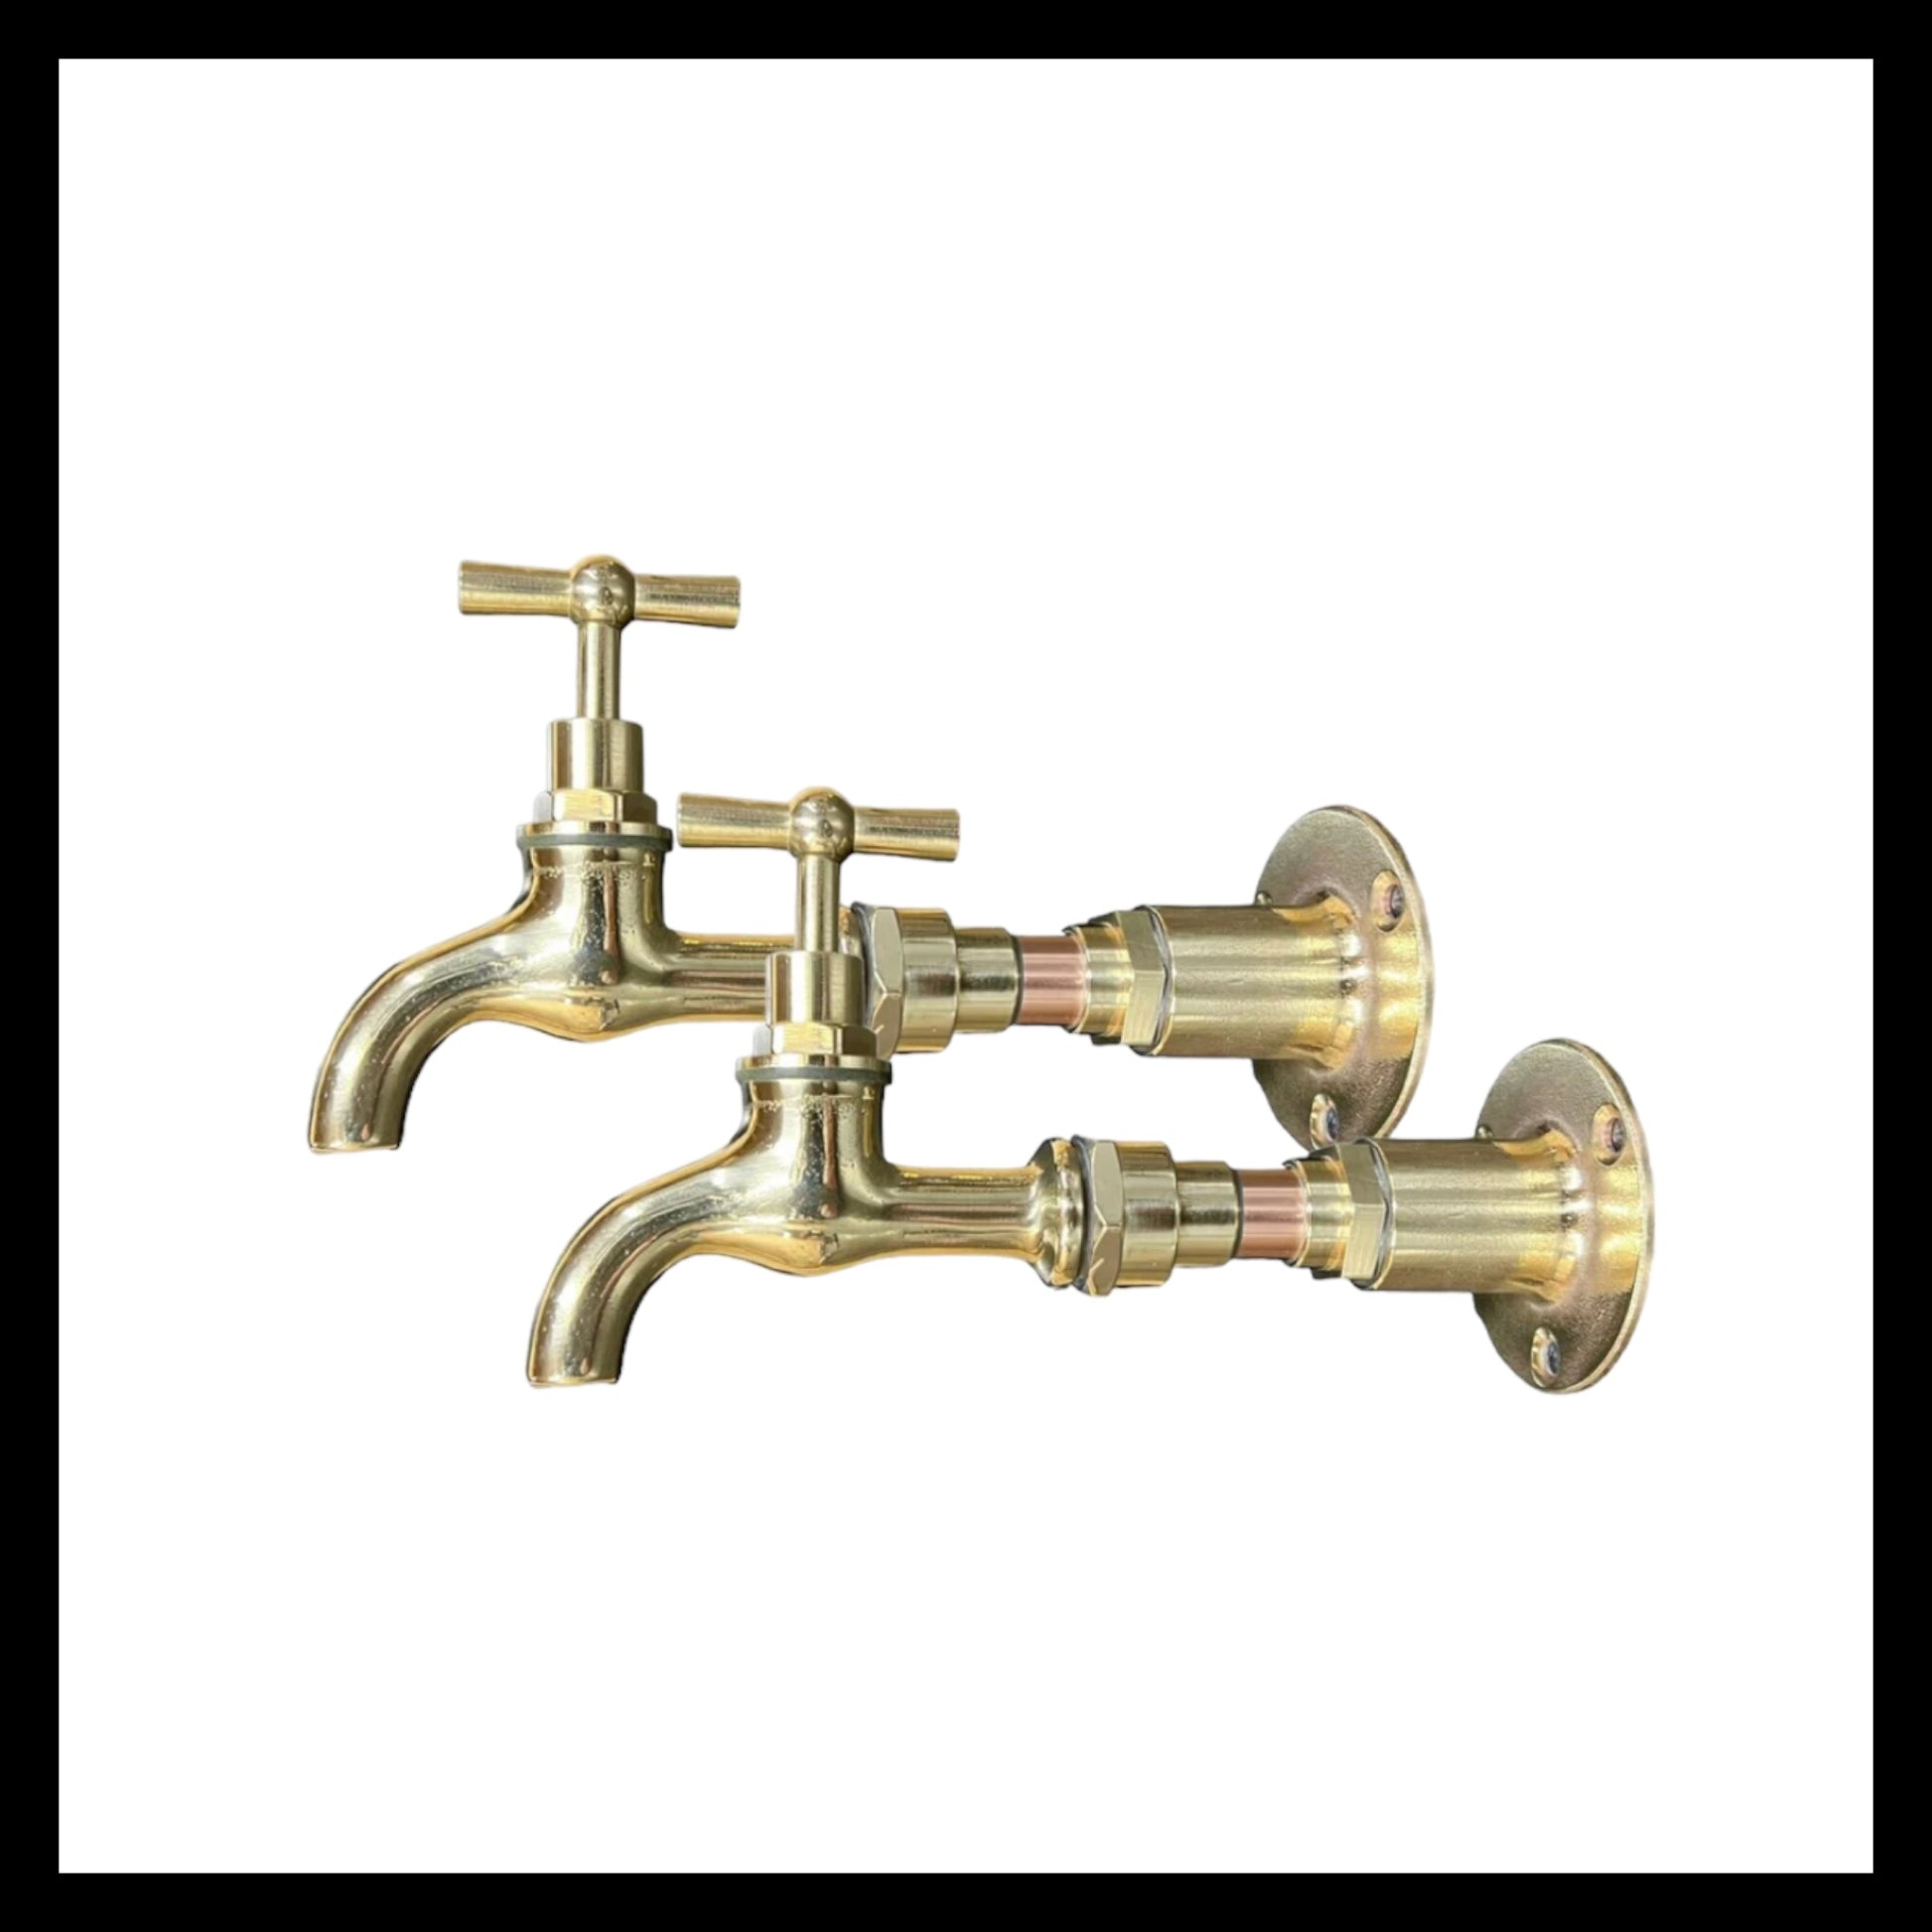 Copper and brass wall mounted taps sold by All Things French Store